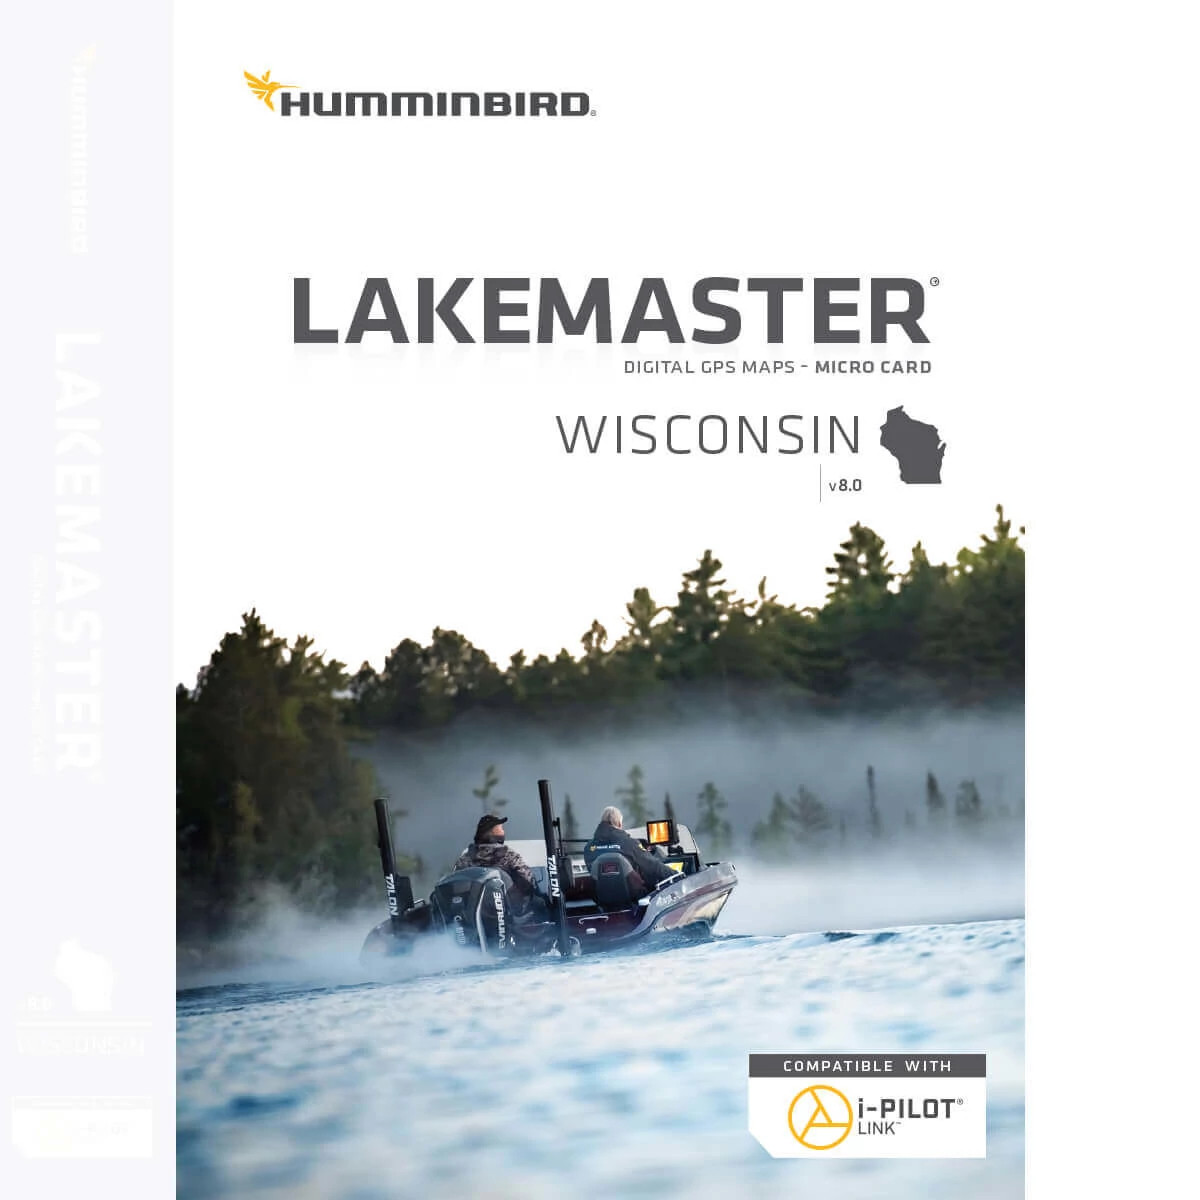 Humminbird 6000257 LakeMaster Wisconsin V8 microSD Format Electronic Chart for sale online 